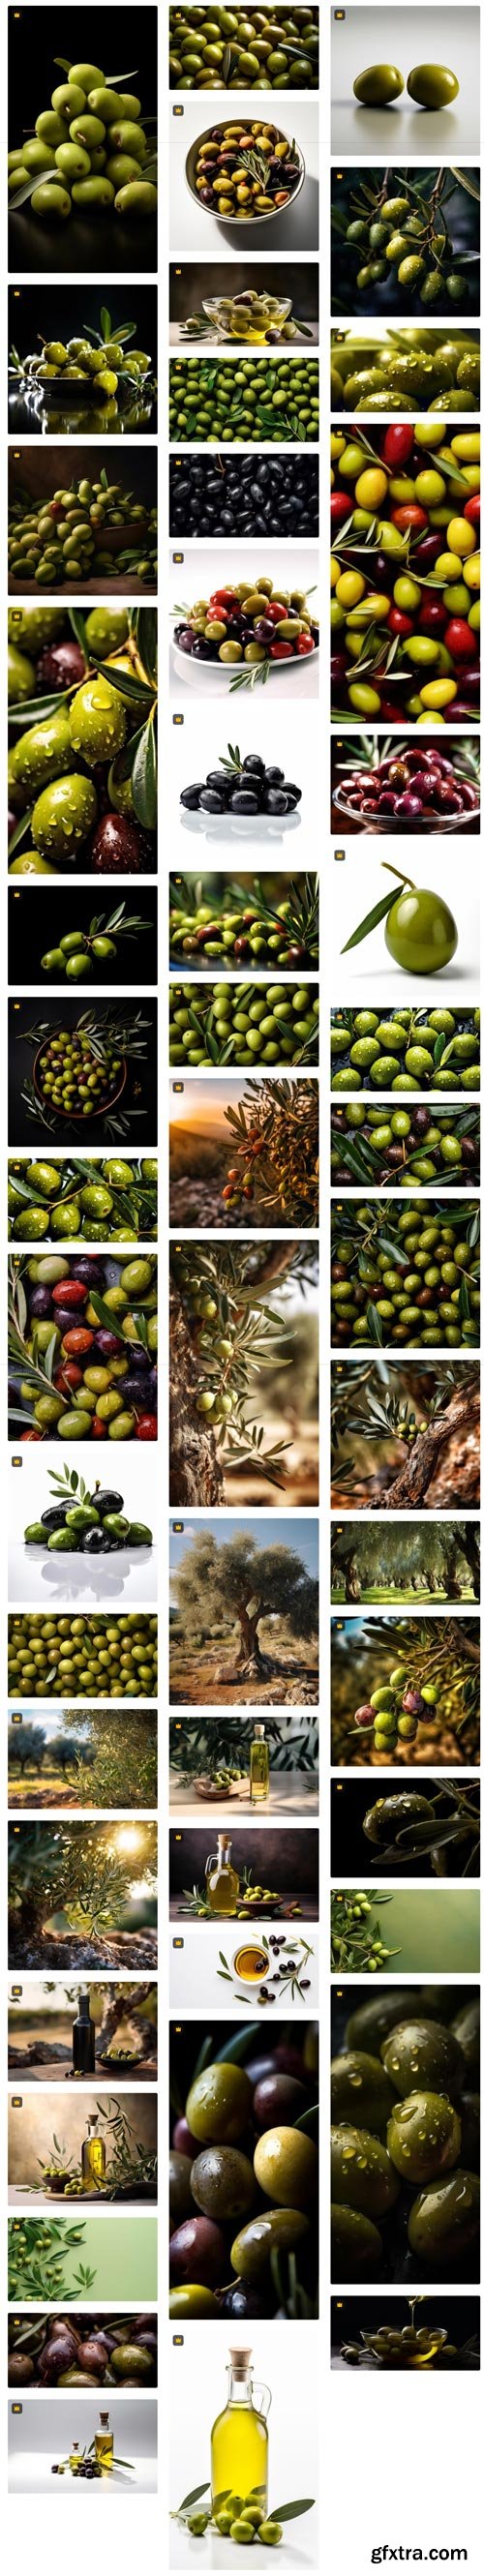 Premium Photo Collections - Olive day - 120xJPG